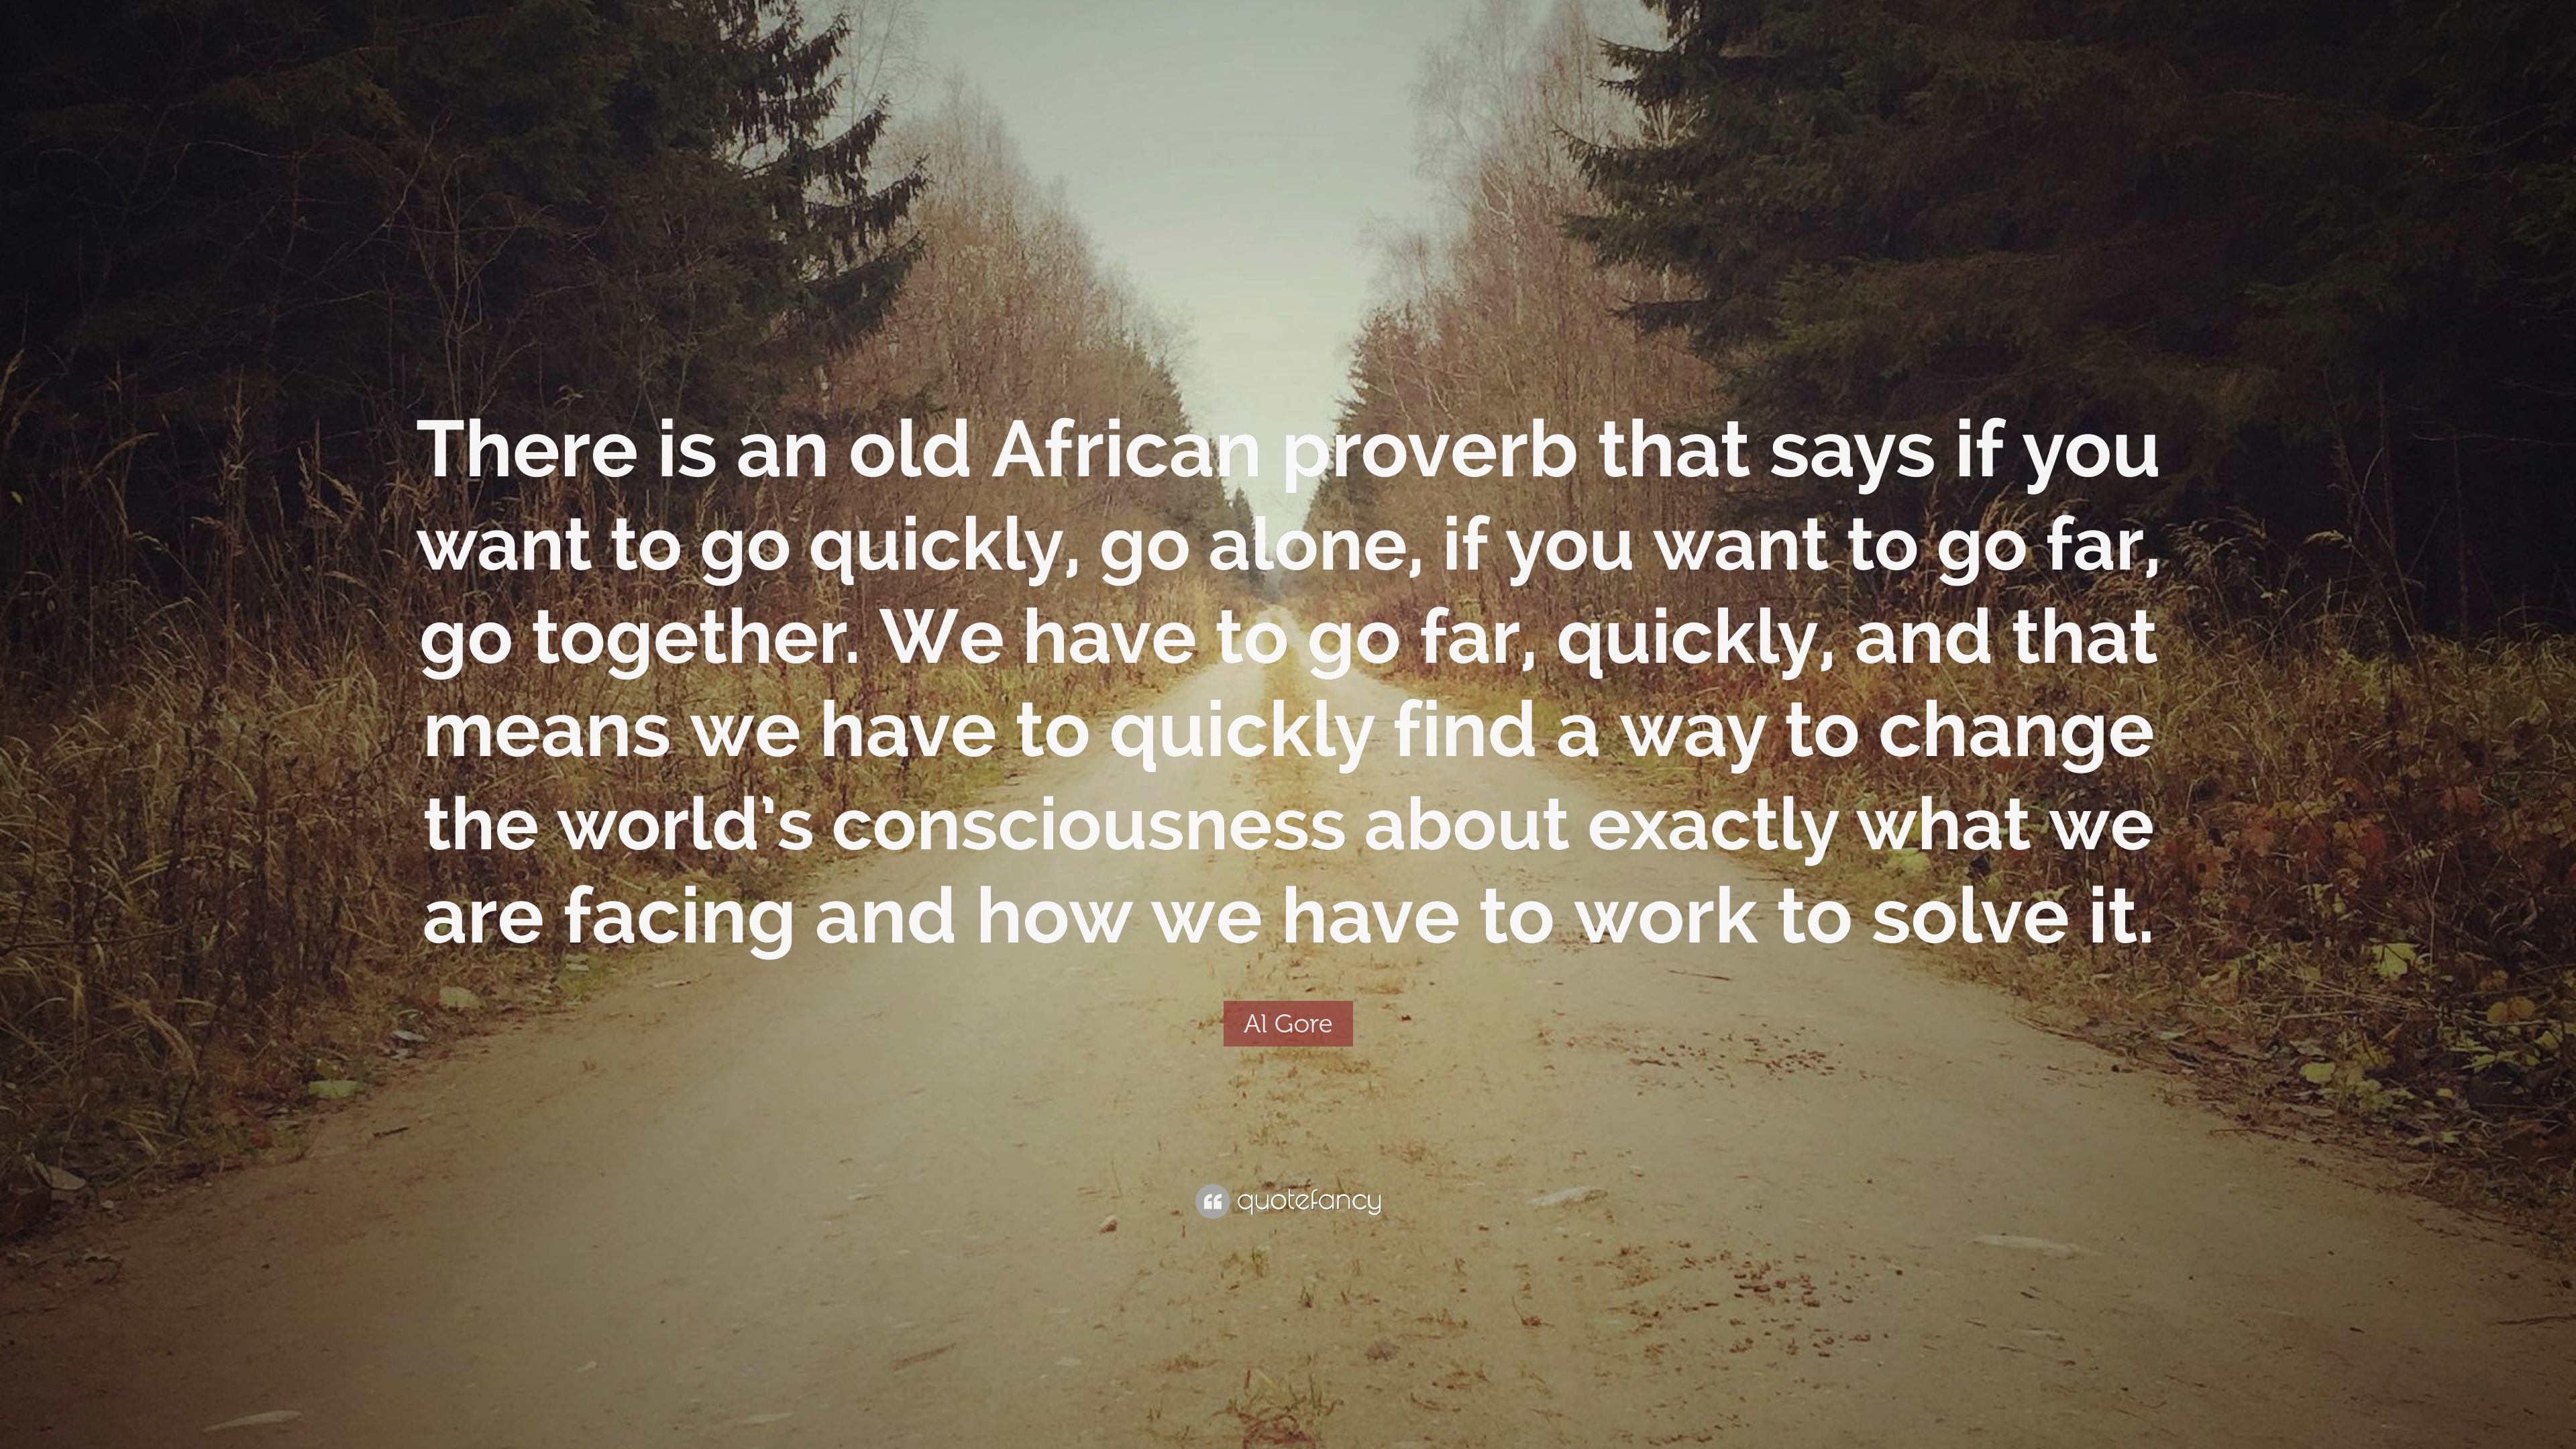 Al Gore Quote: “There is an old African proverb that says if you want